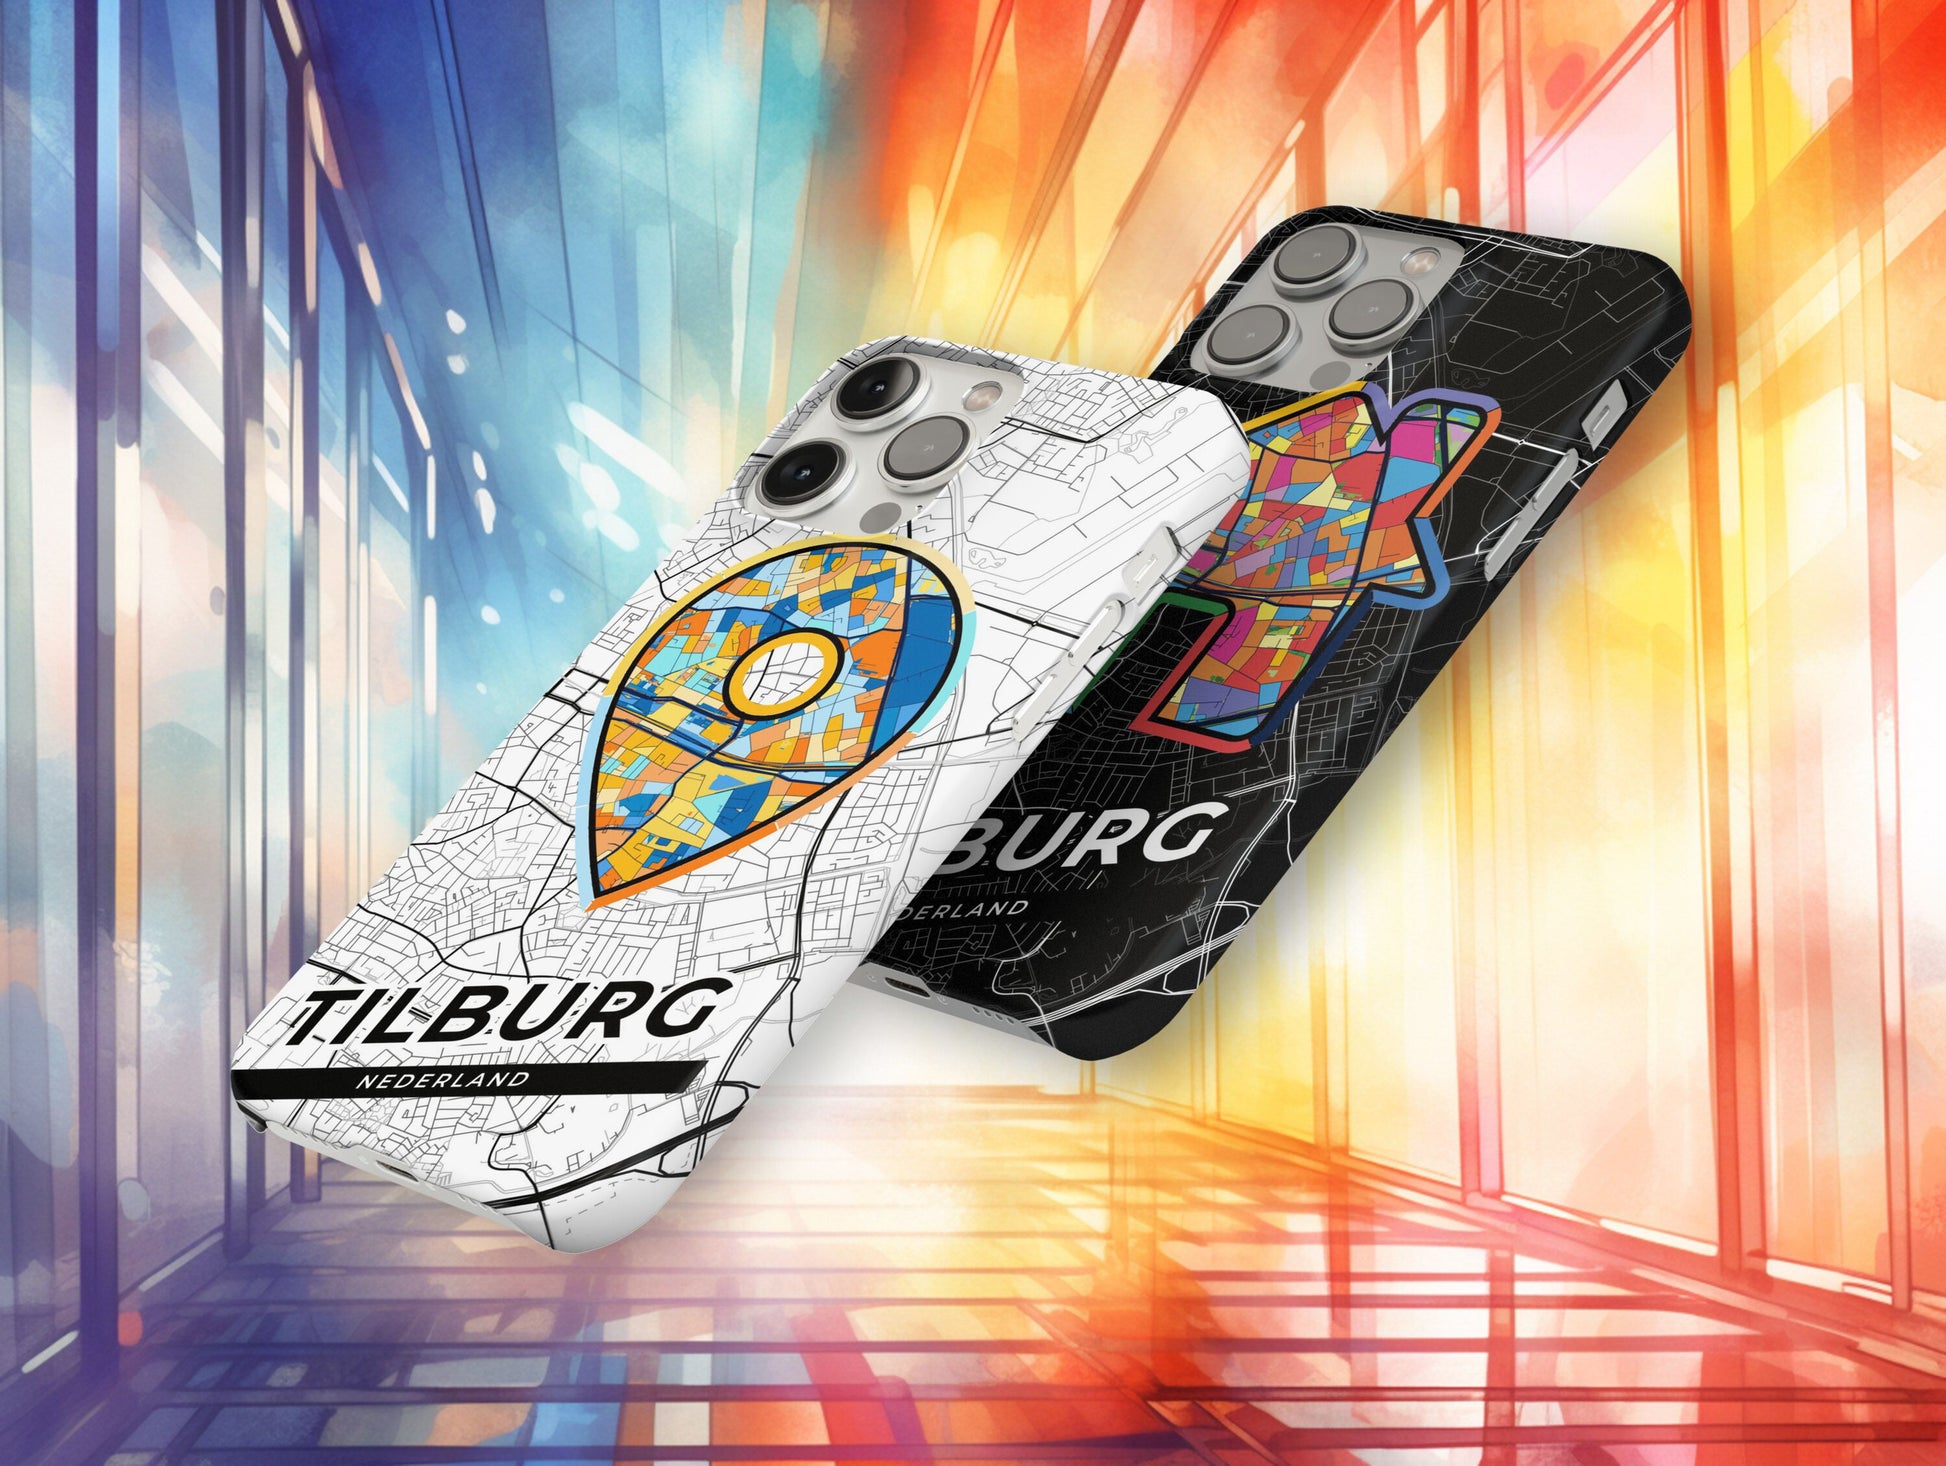 Tilburg Netherlands slim phone case with colorful icon. Birthday, wedding or housewarming gift. Couple match cases.